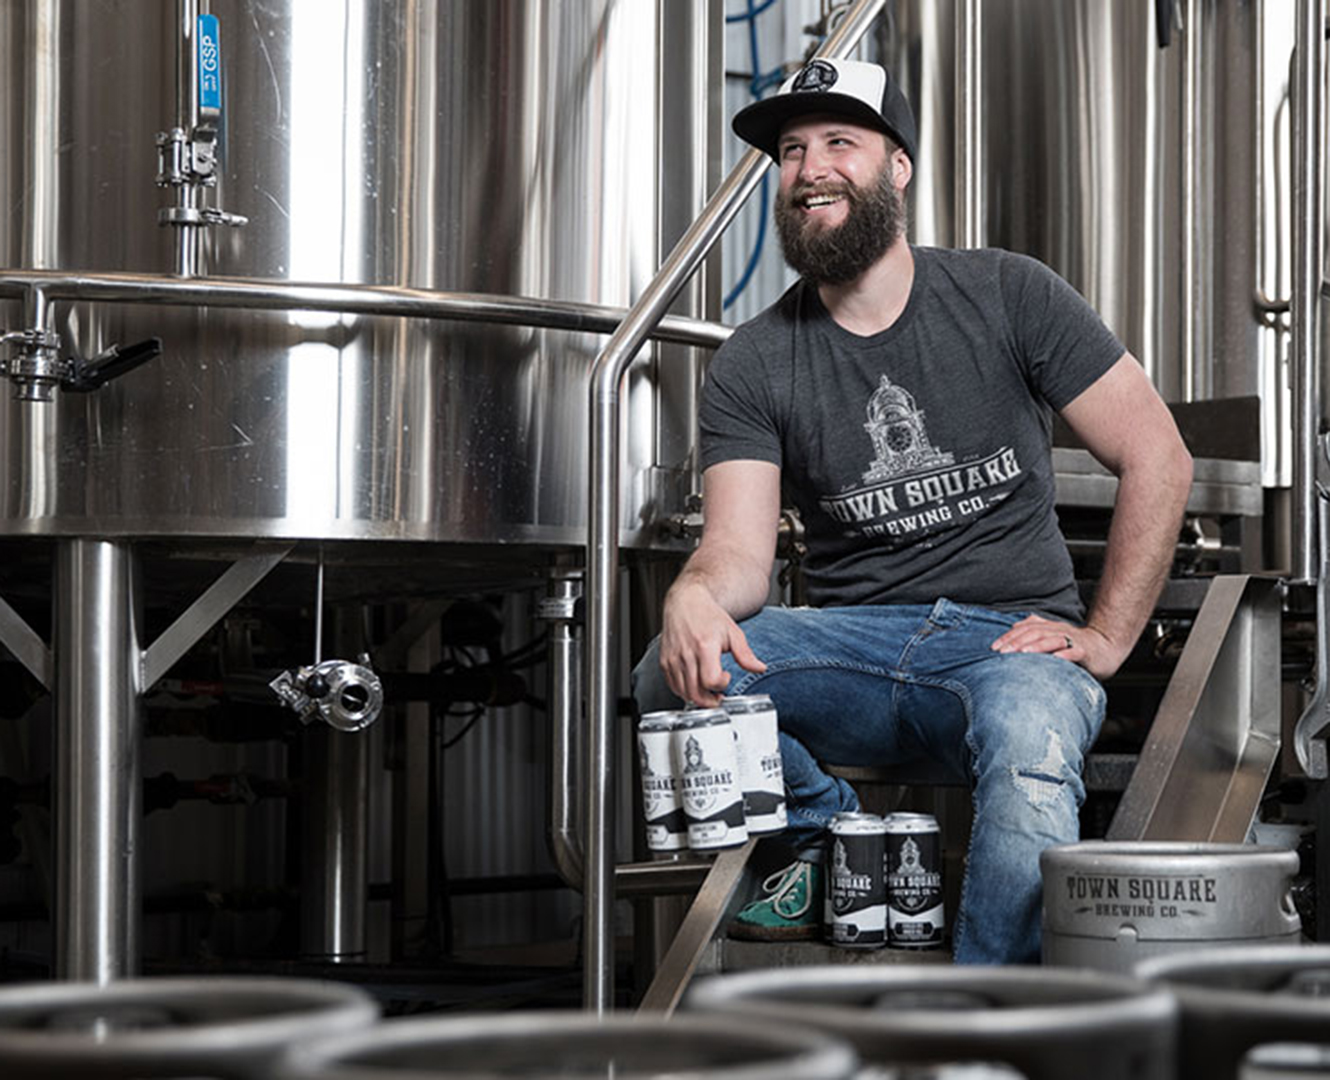 Brandon Boutin Town Square Brewing Brewer Beer